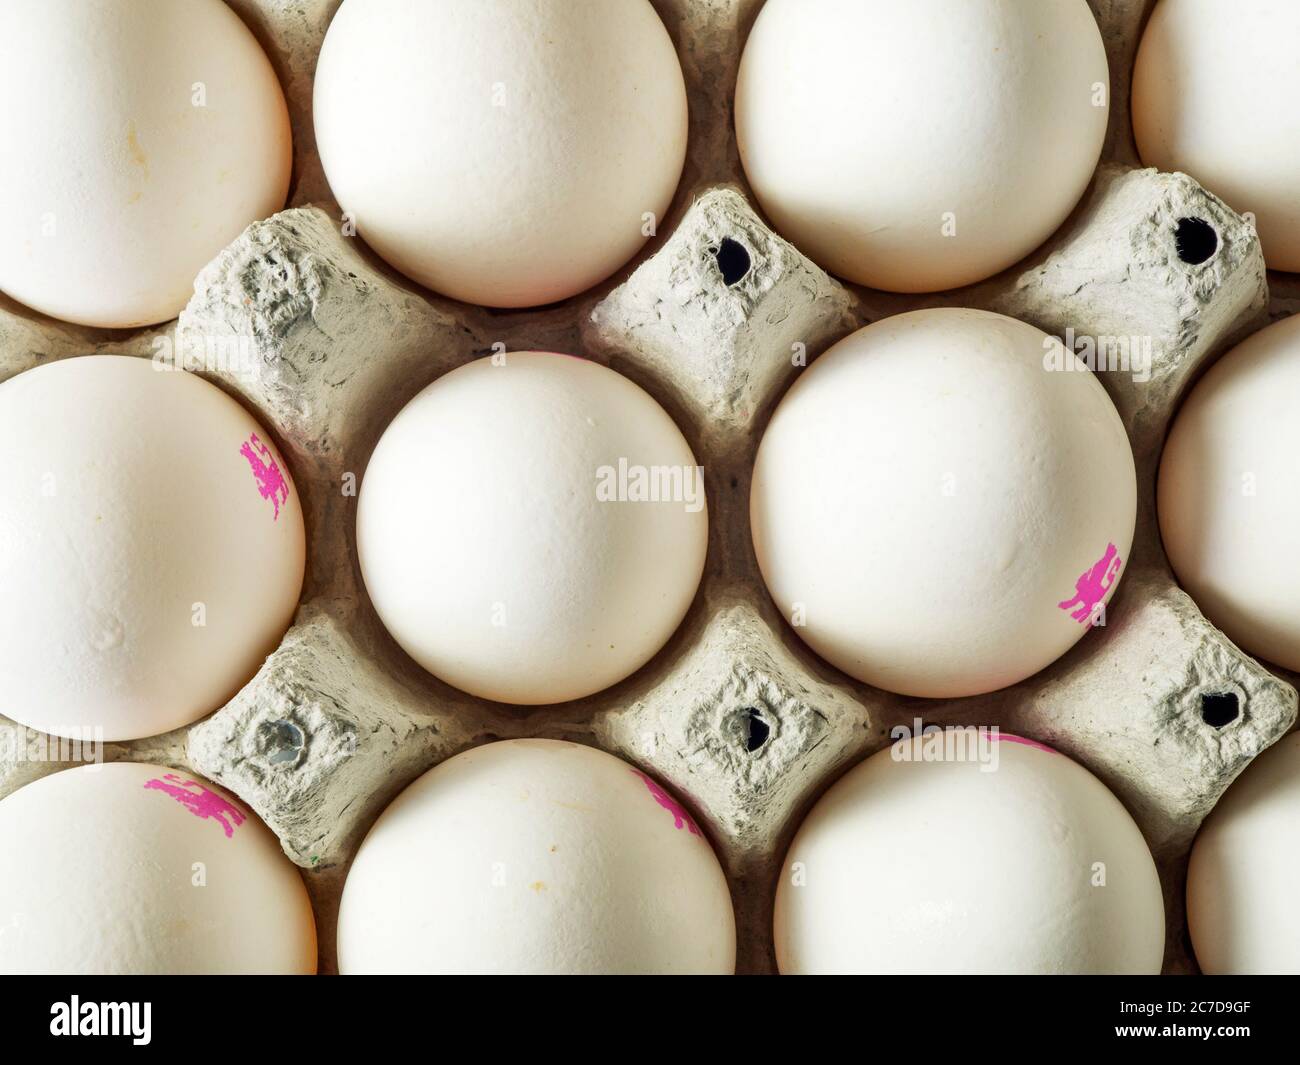 A tray of white eggs from above Stock Photo